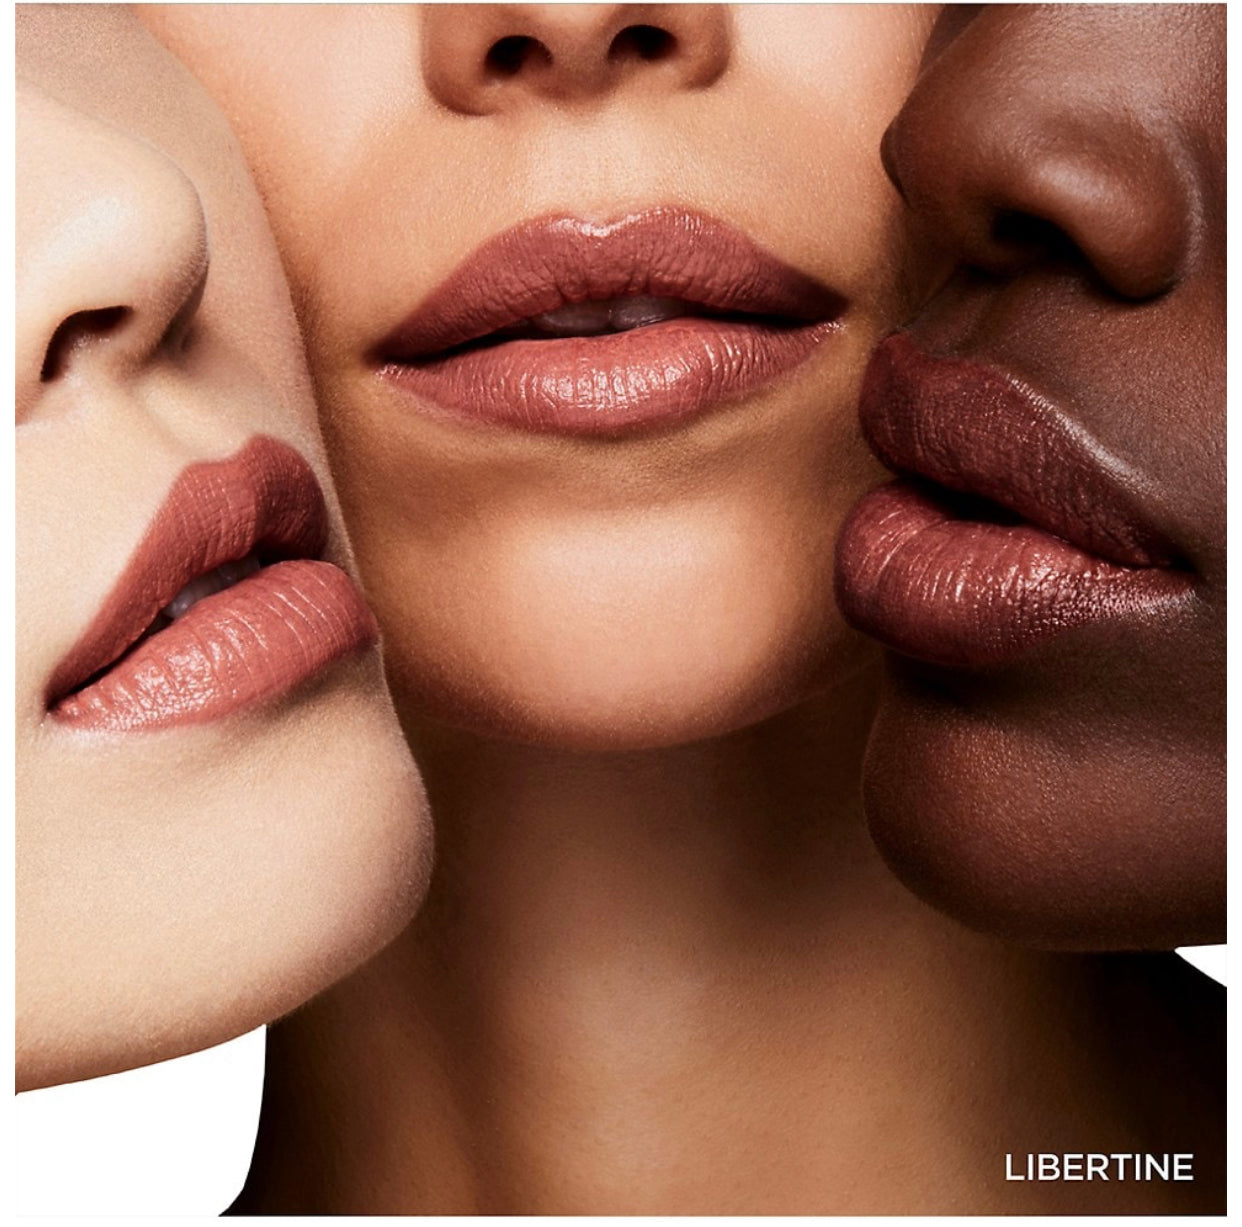 TOM FORD, LIP DISCOVERY COLLECTION